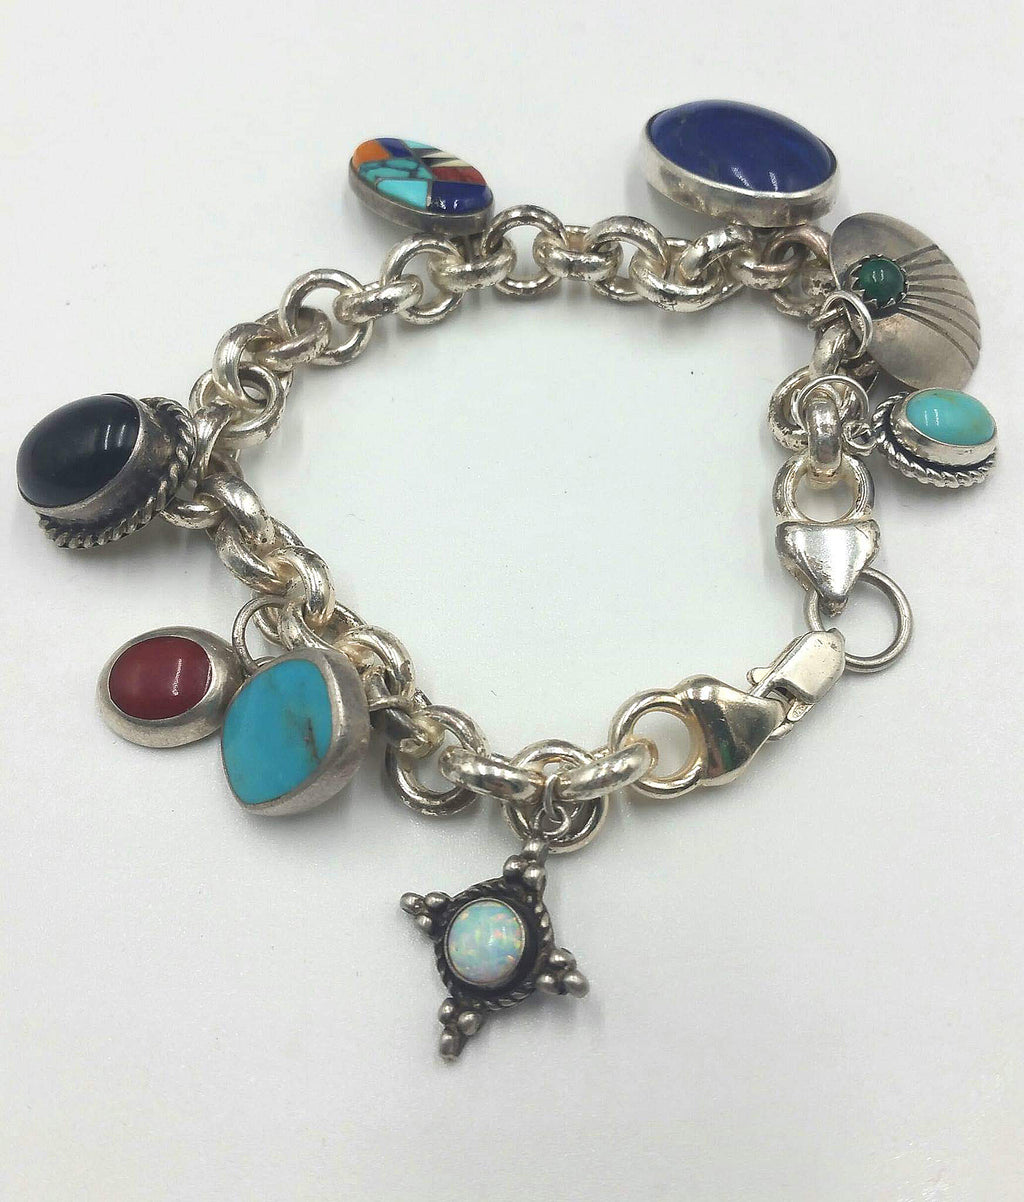 Buy Charm Bracelet With South American Charms Online in India - Etsy